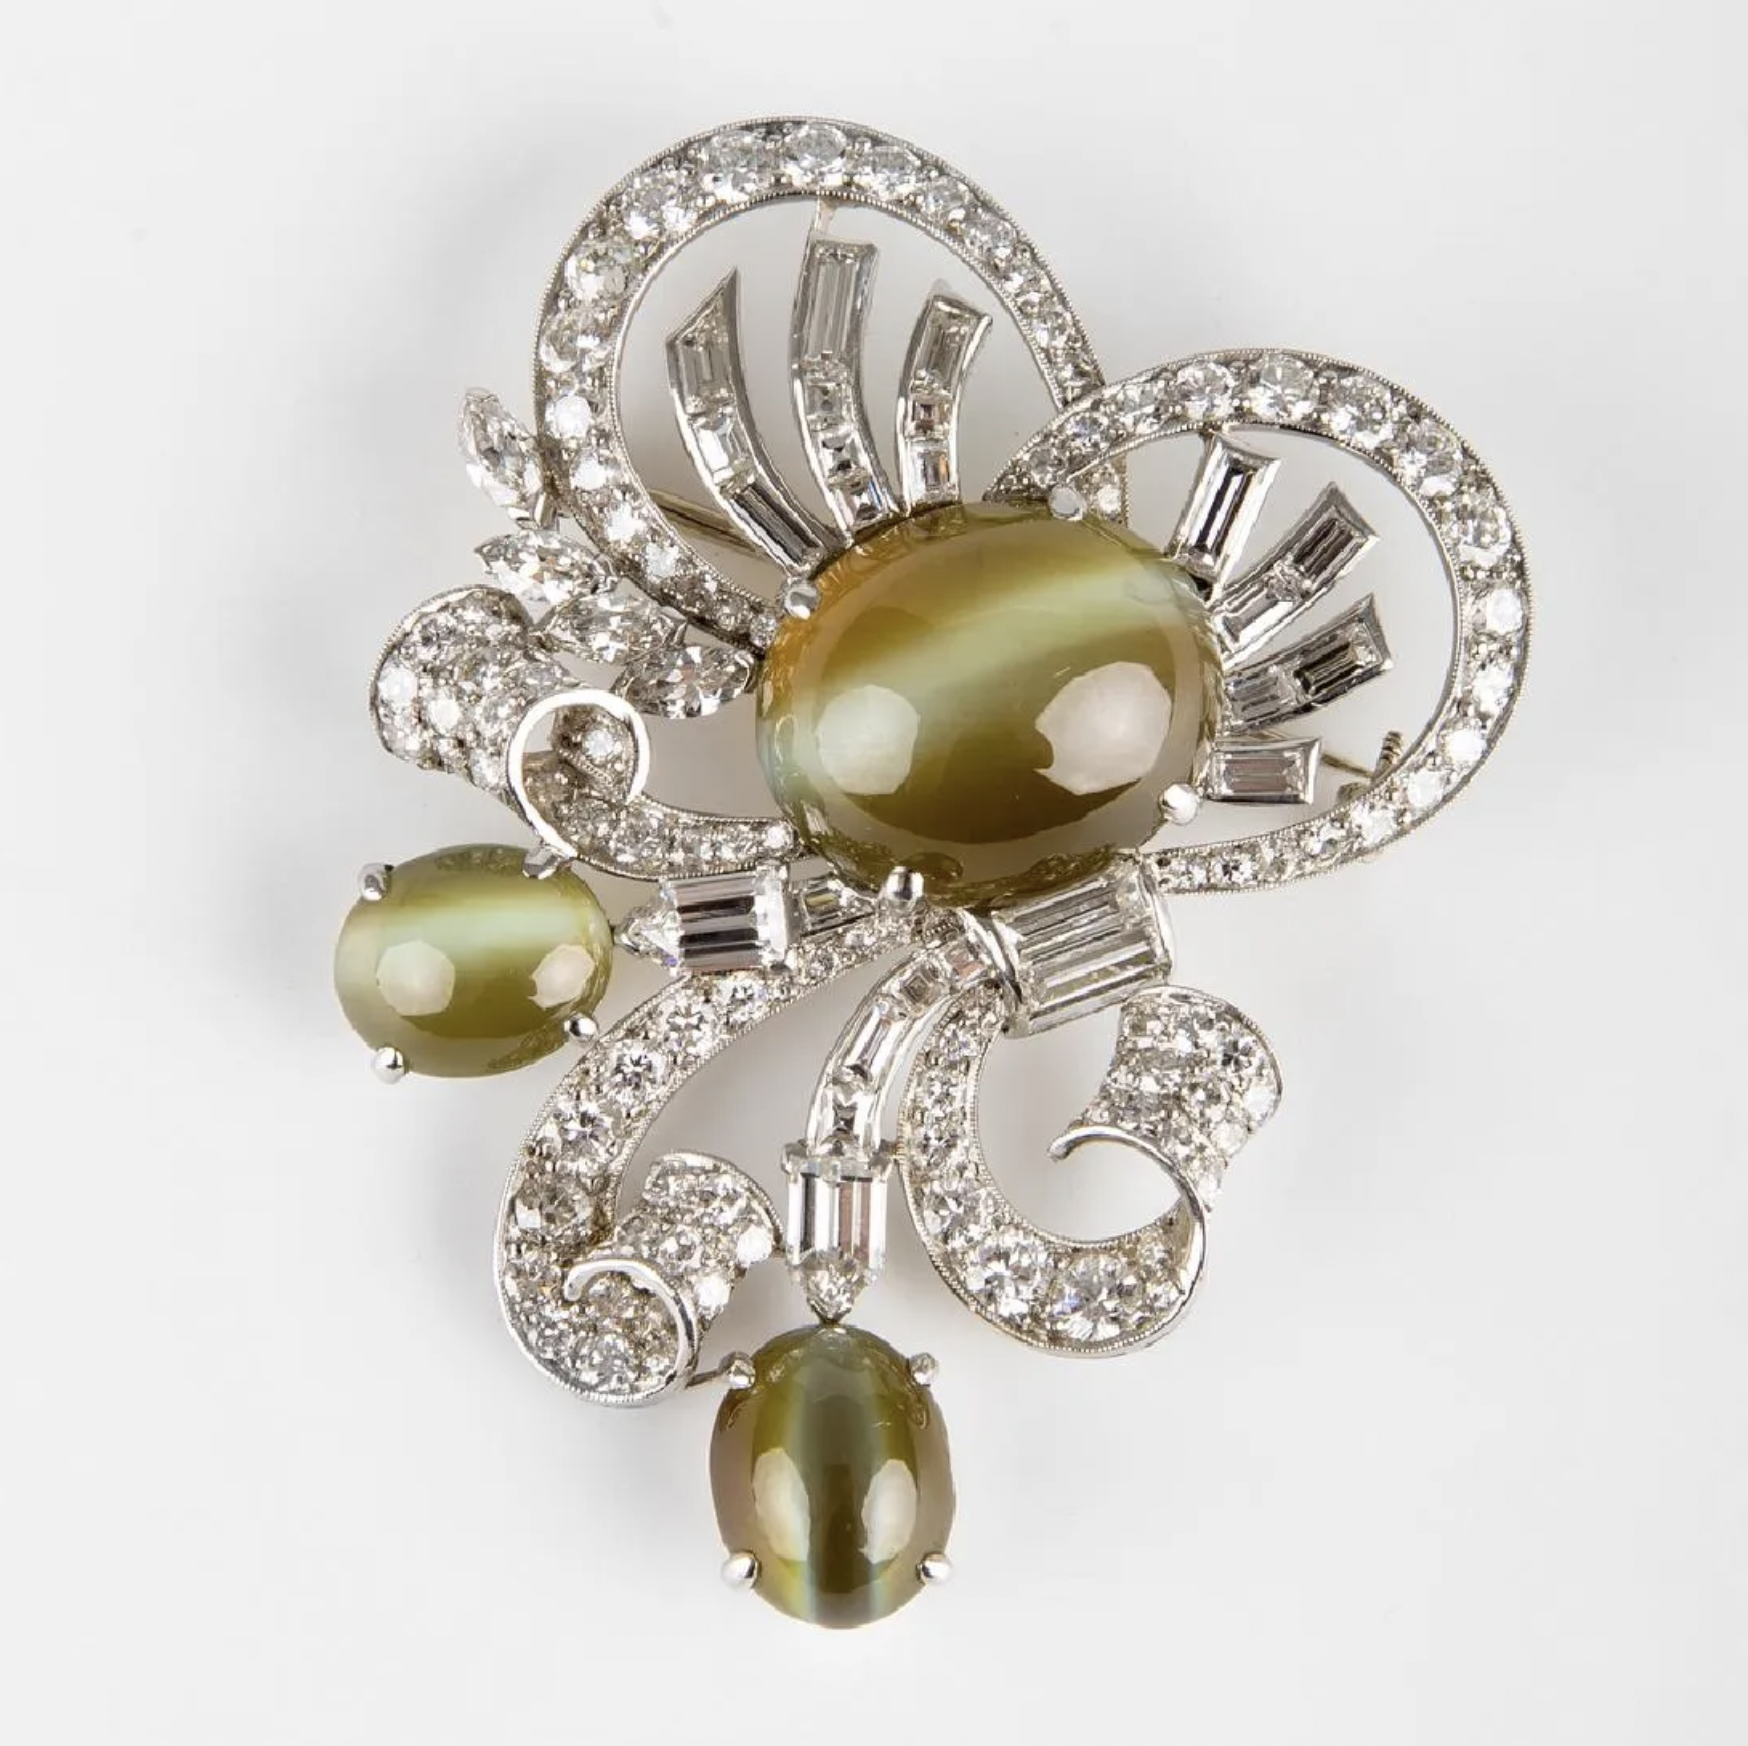 A Raymond Yard bow-form diamond and platinum brooch with three cat’s eye chrysoberyls made $57,500 plus the buyer’s premium in February 2018. Image courtesy of Abell Auction and LiveAuctioneers.